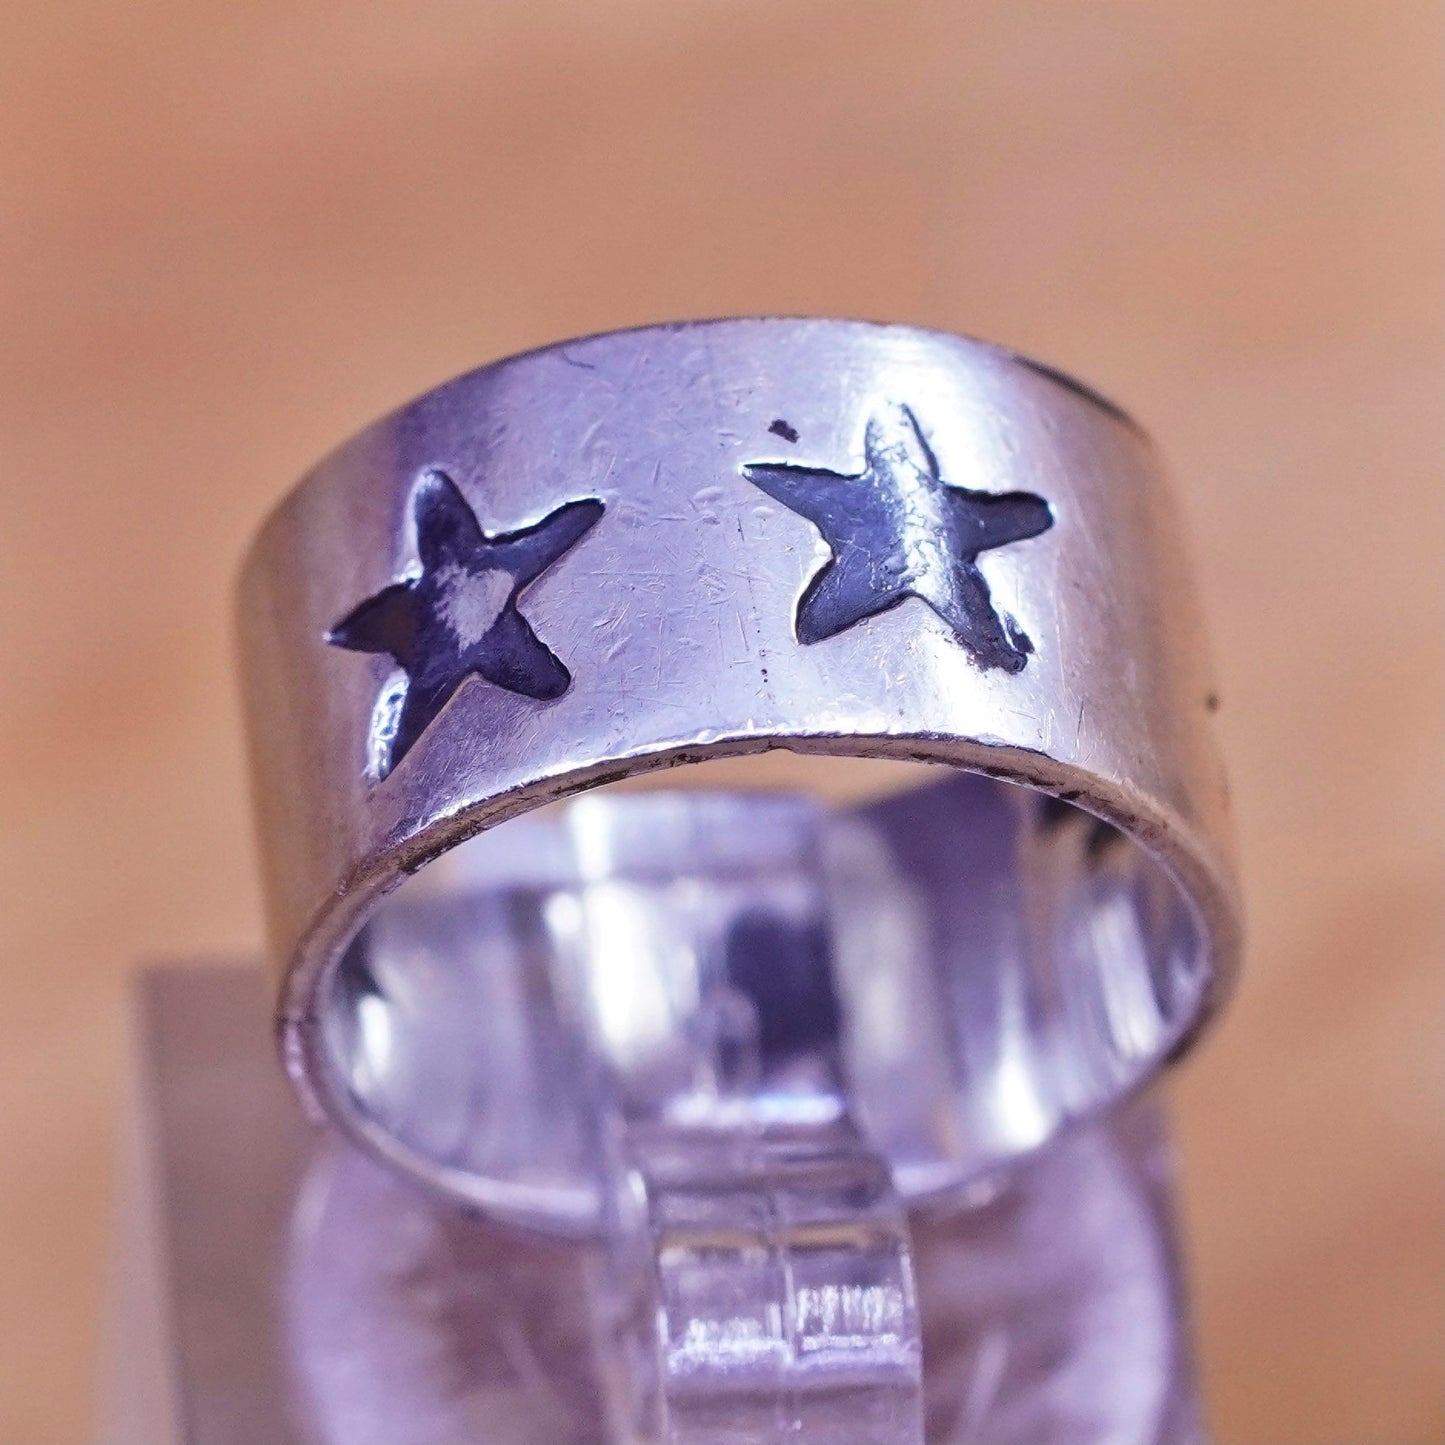 Size 4.25, vintage Mexico Sterling silver handmade ring, 925 relief star band